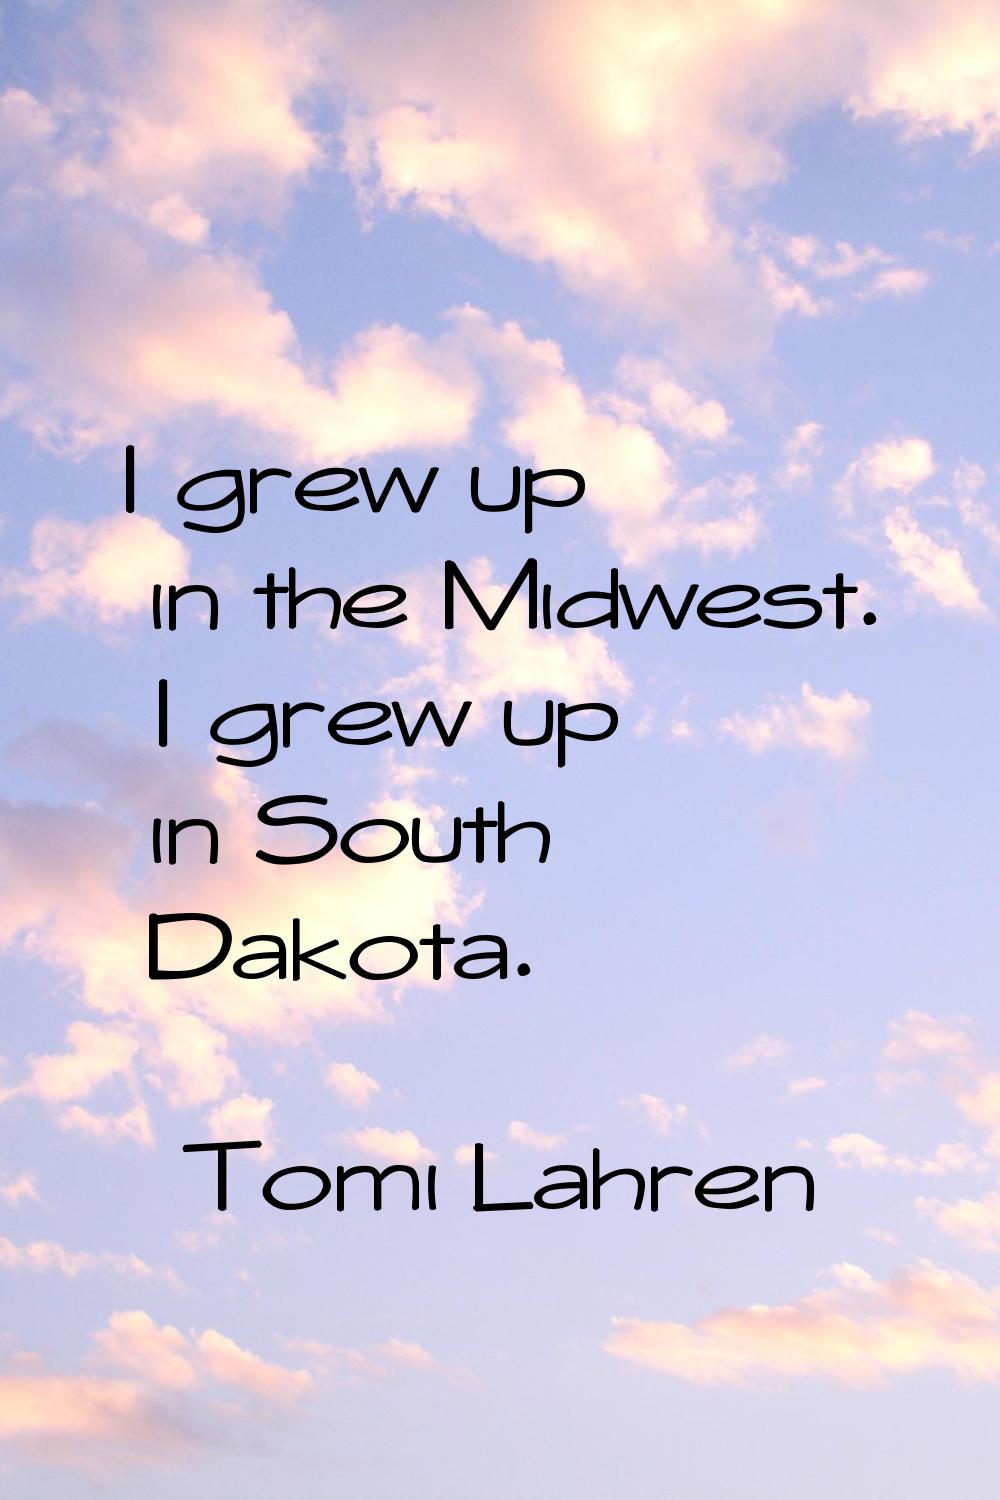 I grew up in the Midwest. I grew up in South Dakota.